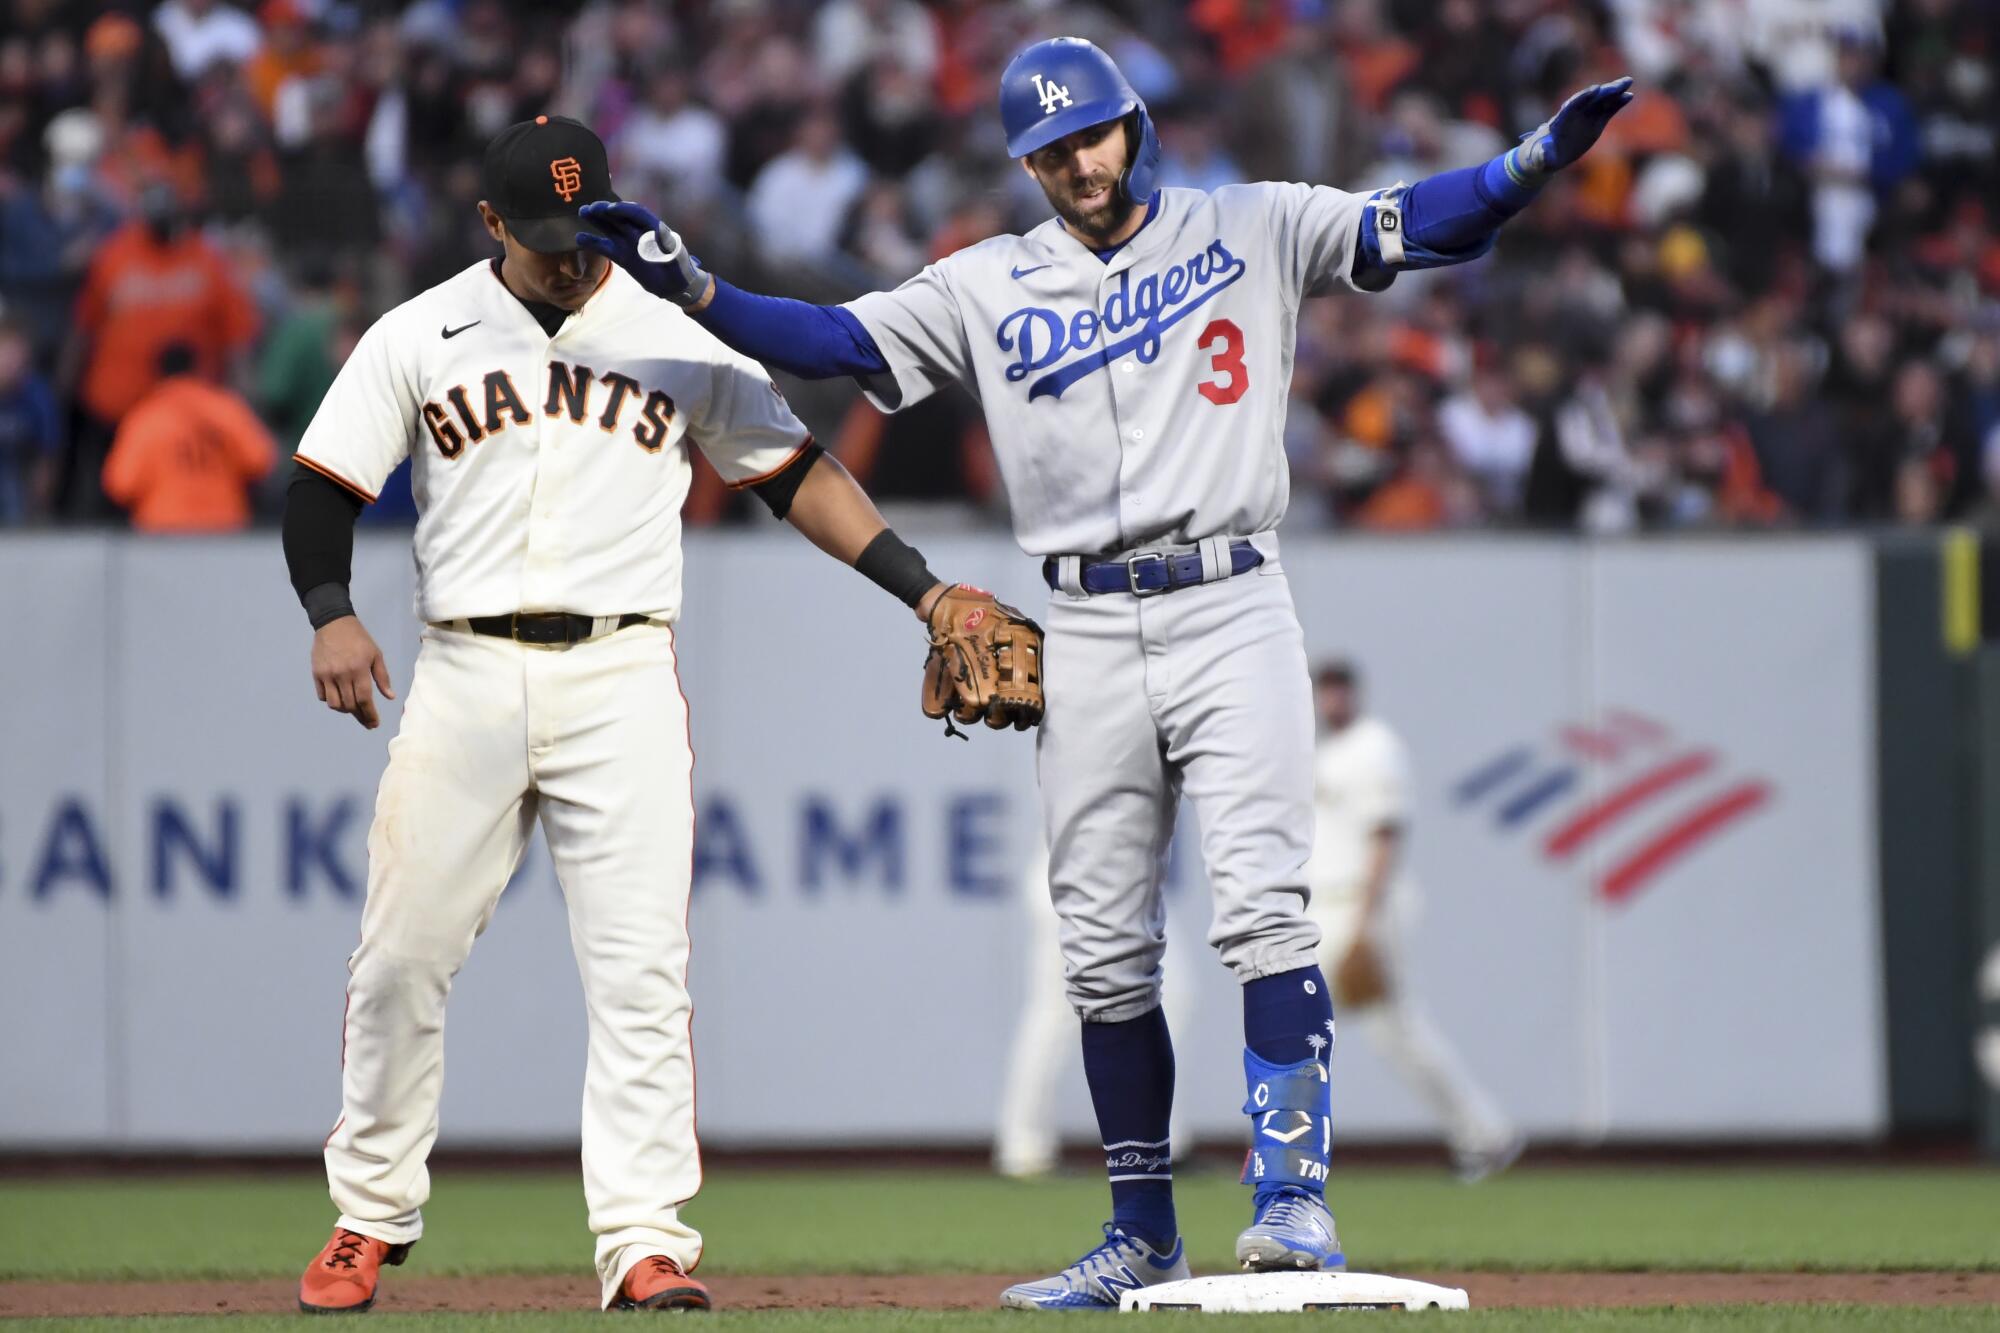  Dodgers' Chris Taylor, right, reacts after reaching second on a double.